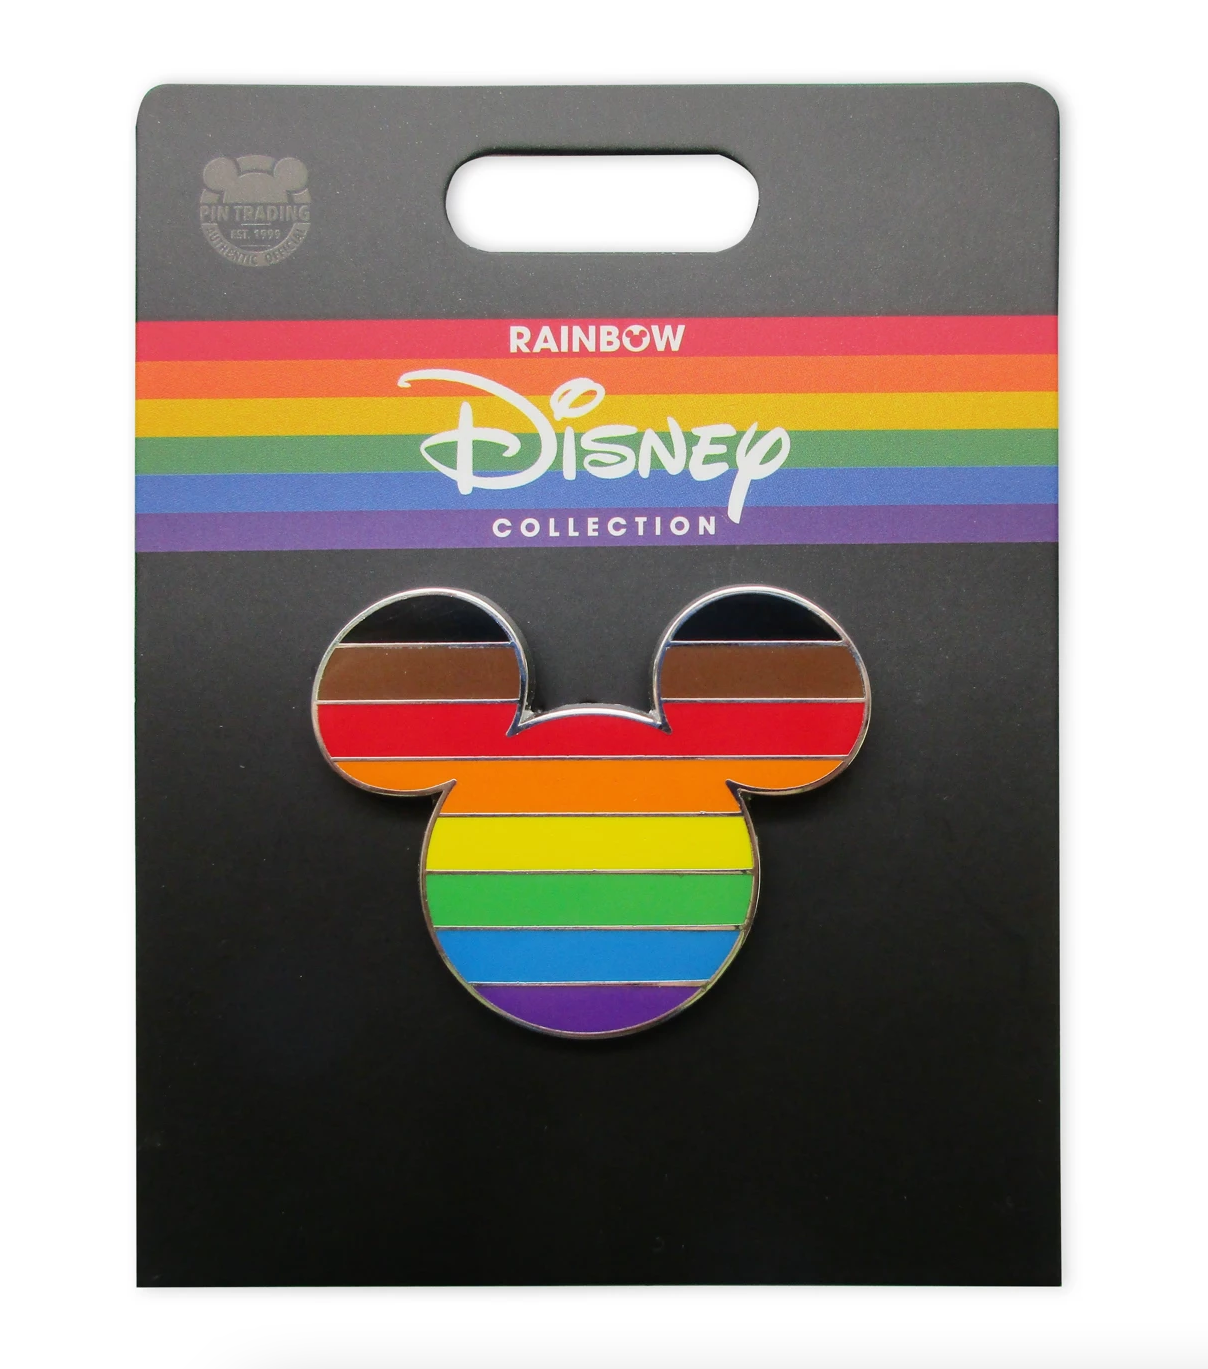 Four New Pride Flag Pins Join Rainbow Disney Collection